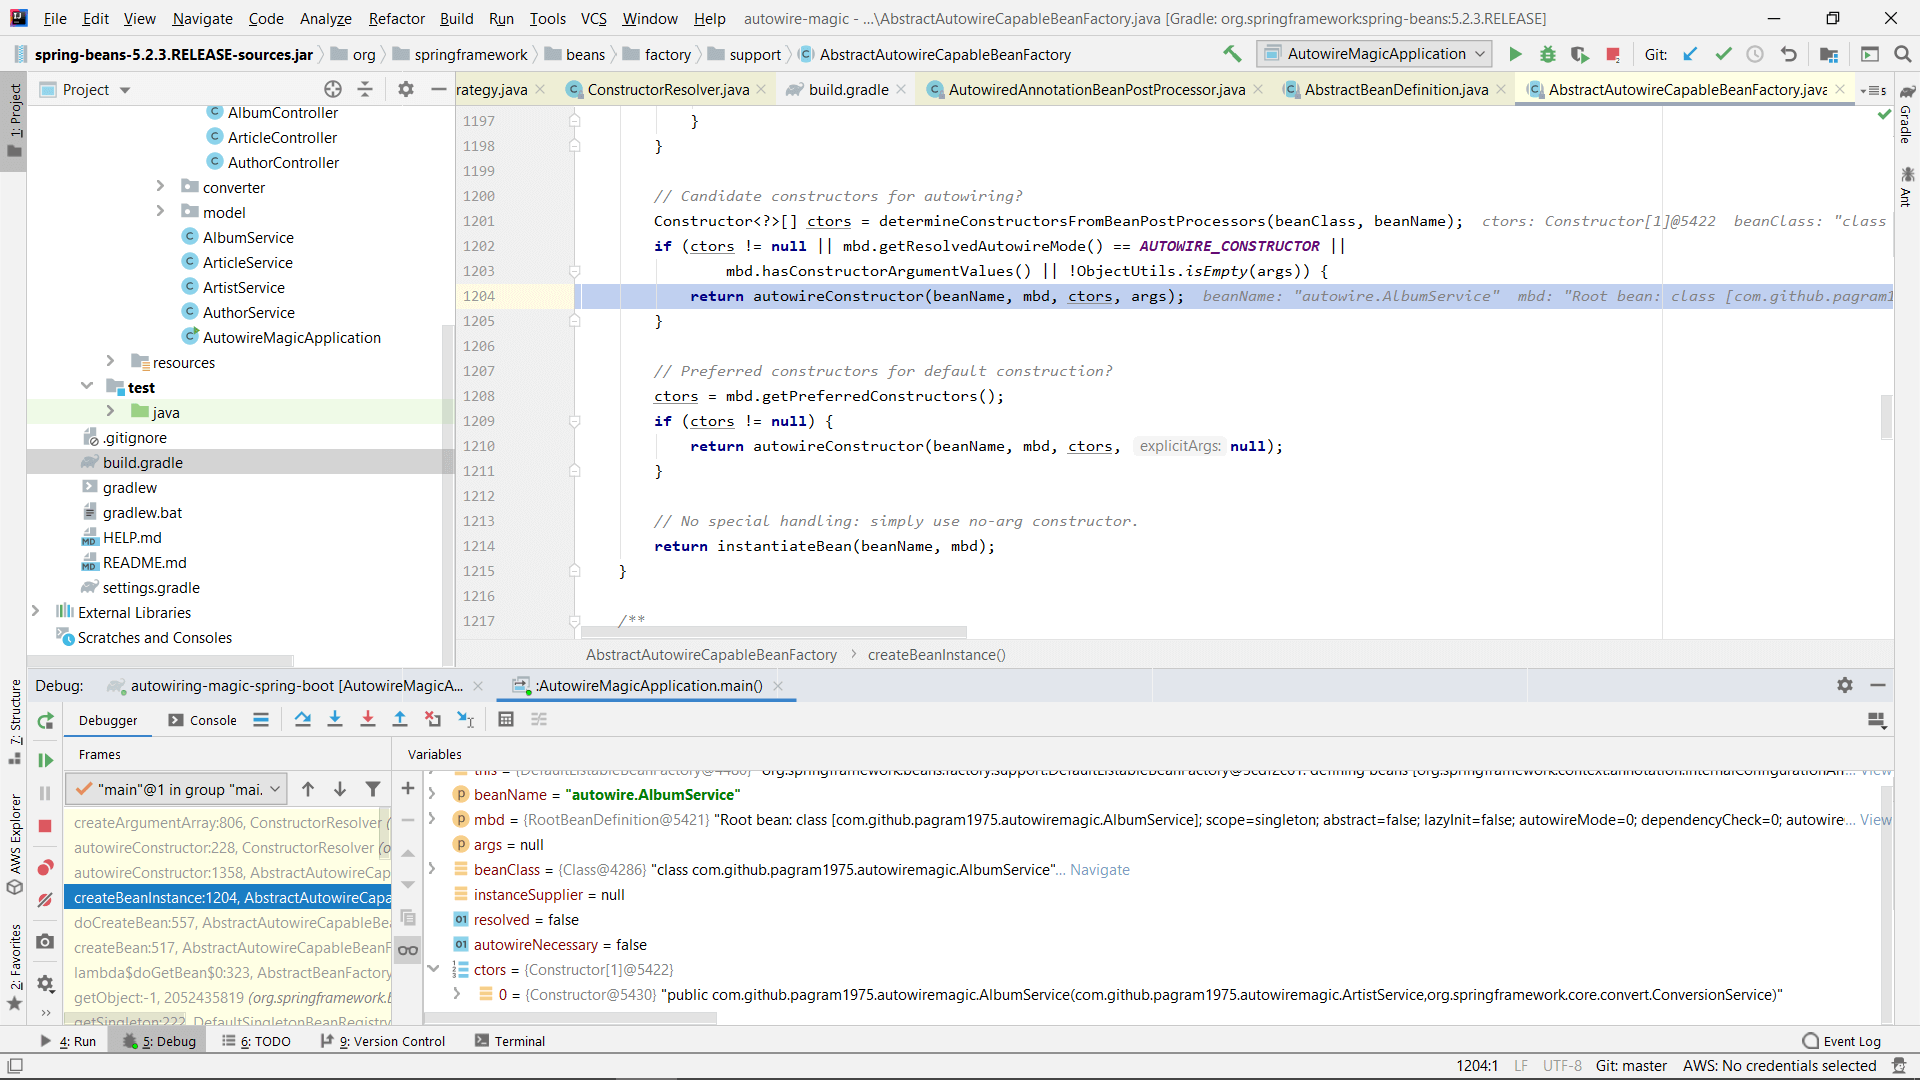 Debugging Spring in IntelliJ Idea to see the constructor for AlbumService has been chosen